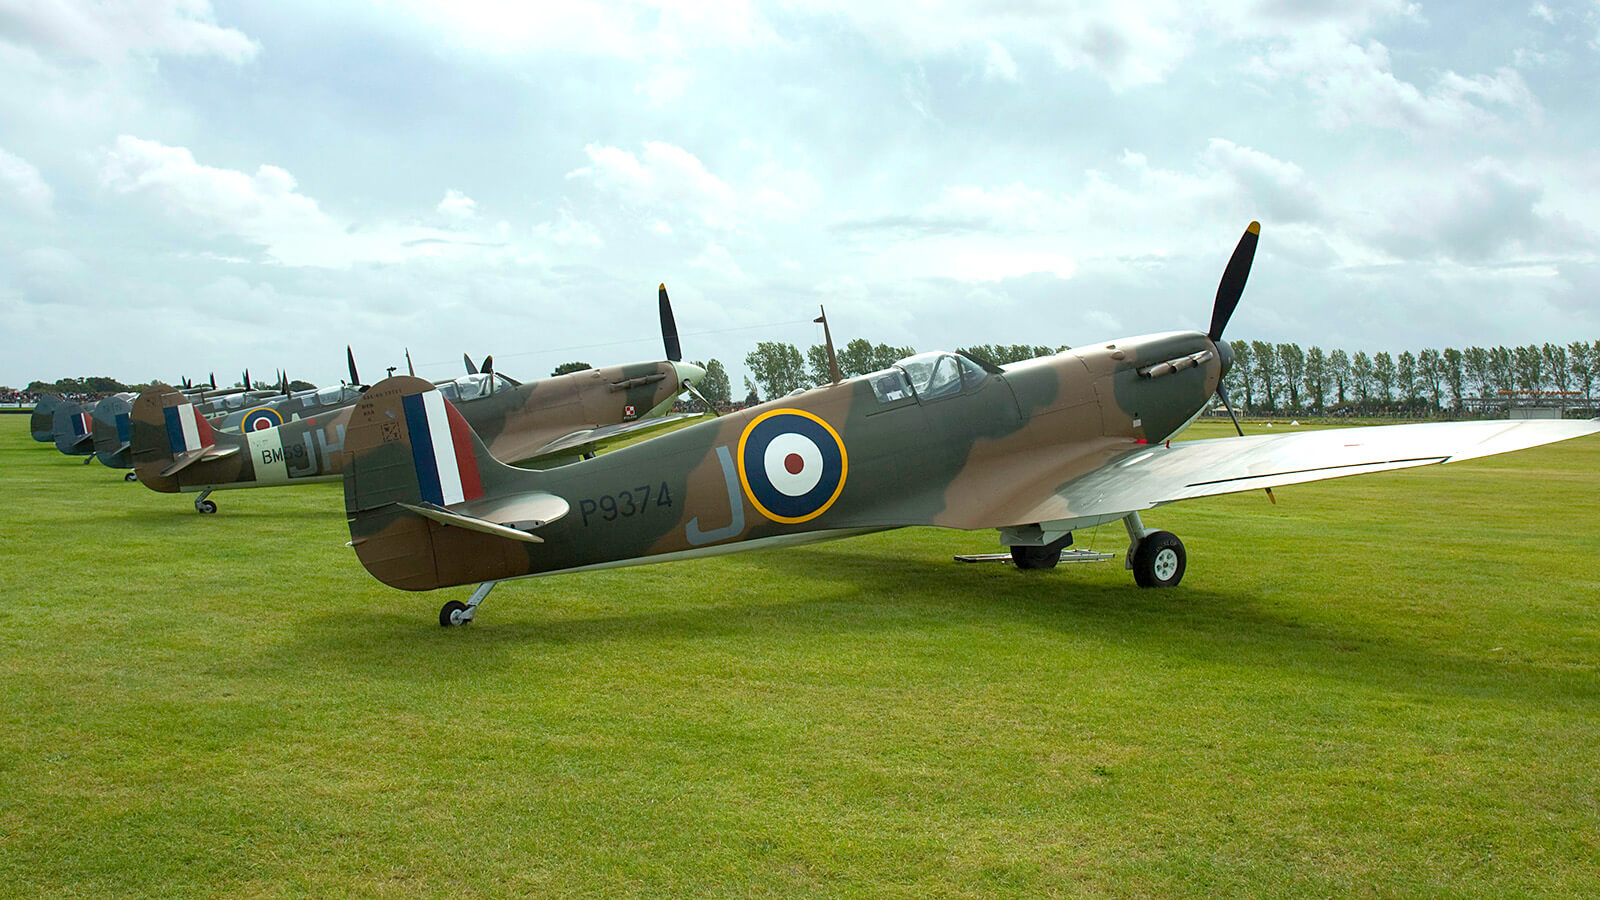   Fly In A Spitfire: Experience